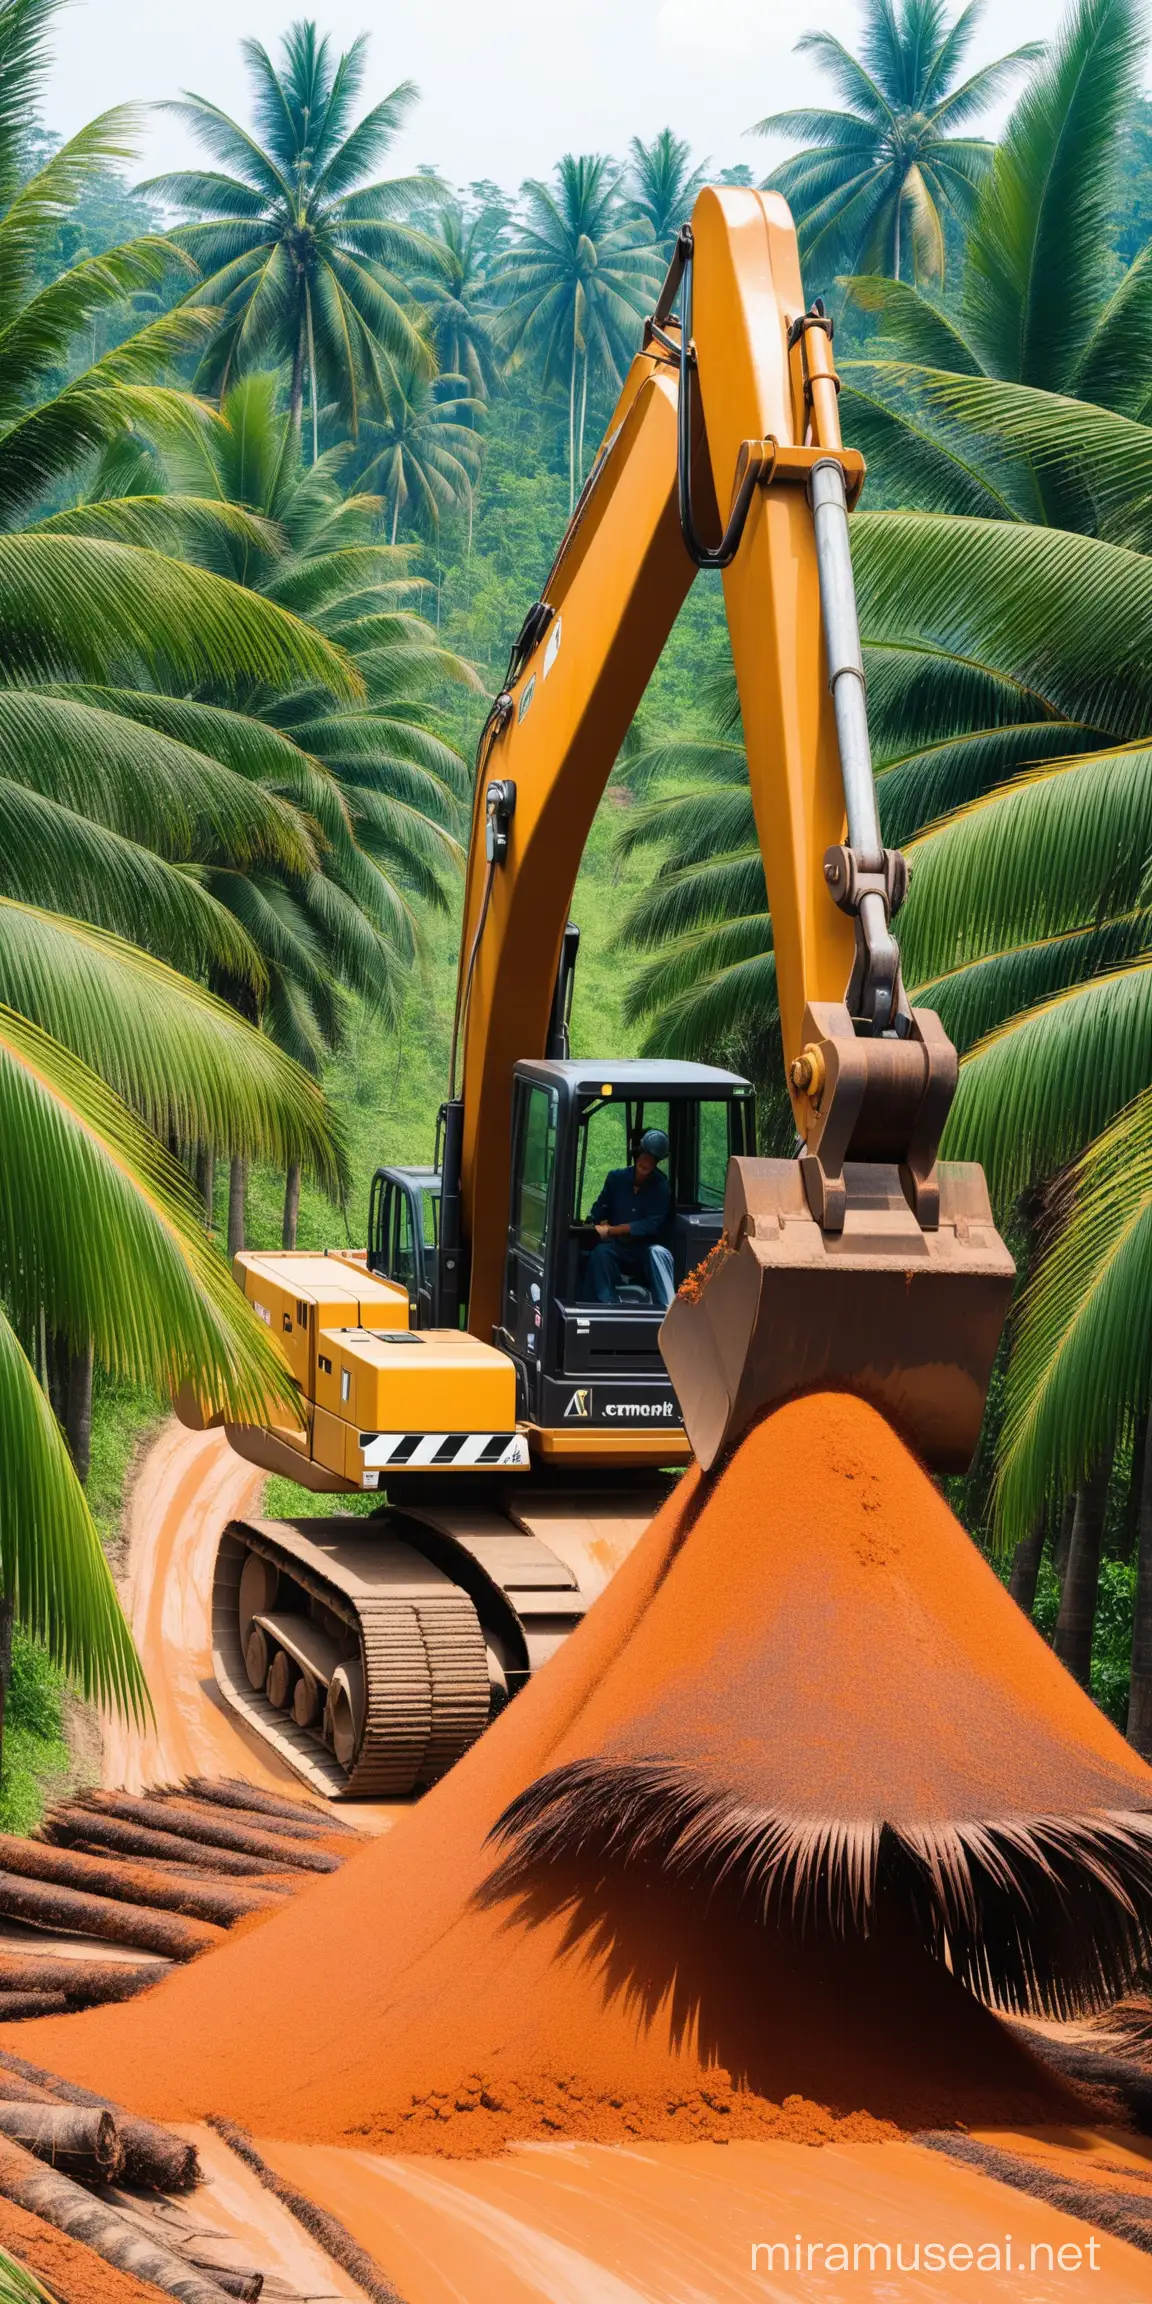 Excavator Cutting Palm Oil Tree Industrial Agricultural Machinery in Action